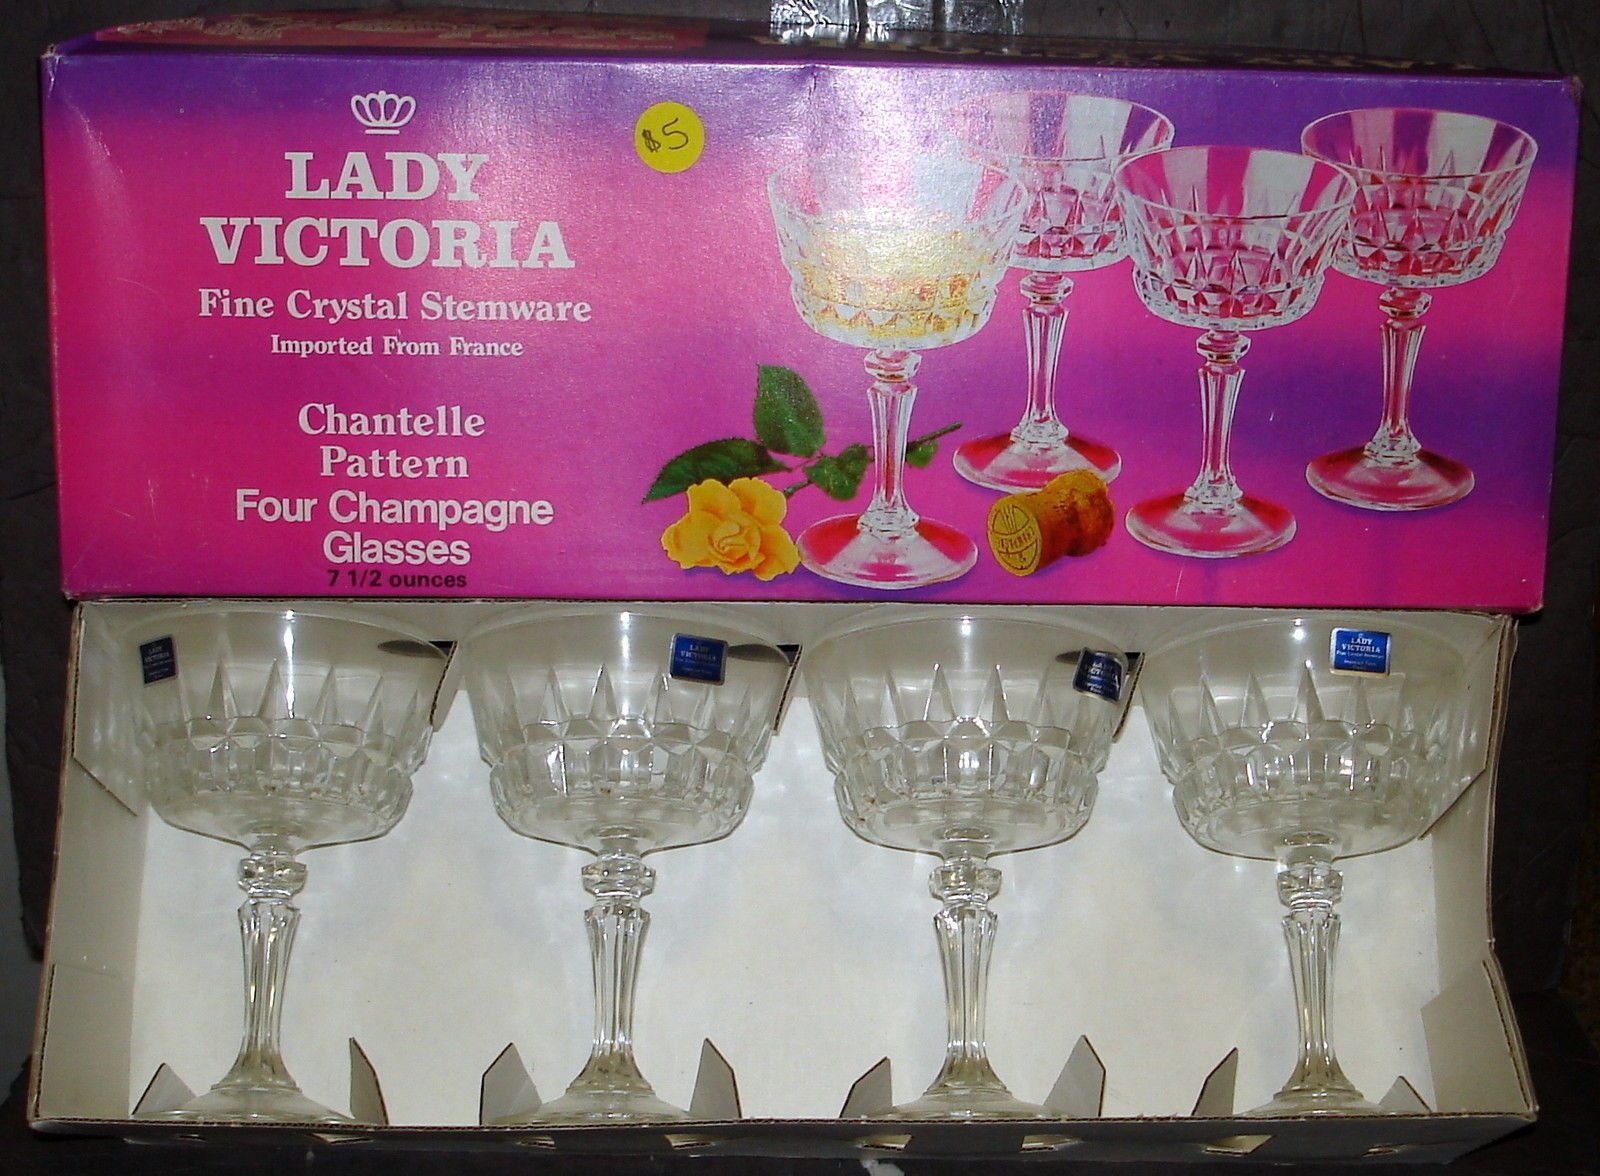 16 Lovely Cristal D Arques Lead Crystal Vase 2024 free download cristal d arques lead crystal vase of two cristal darques durand chantelle lady victoria 6 1 8 wine within 4 cristal darques lady victoria chantelle champagne sherbert glasses nib picclick